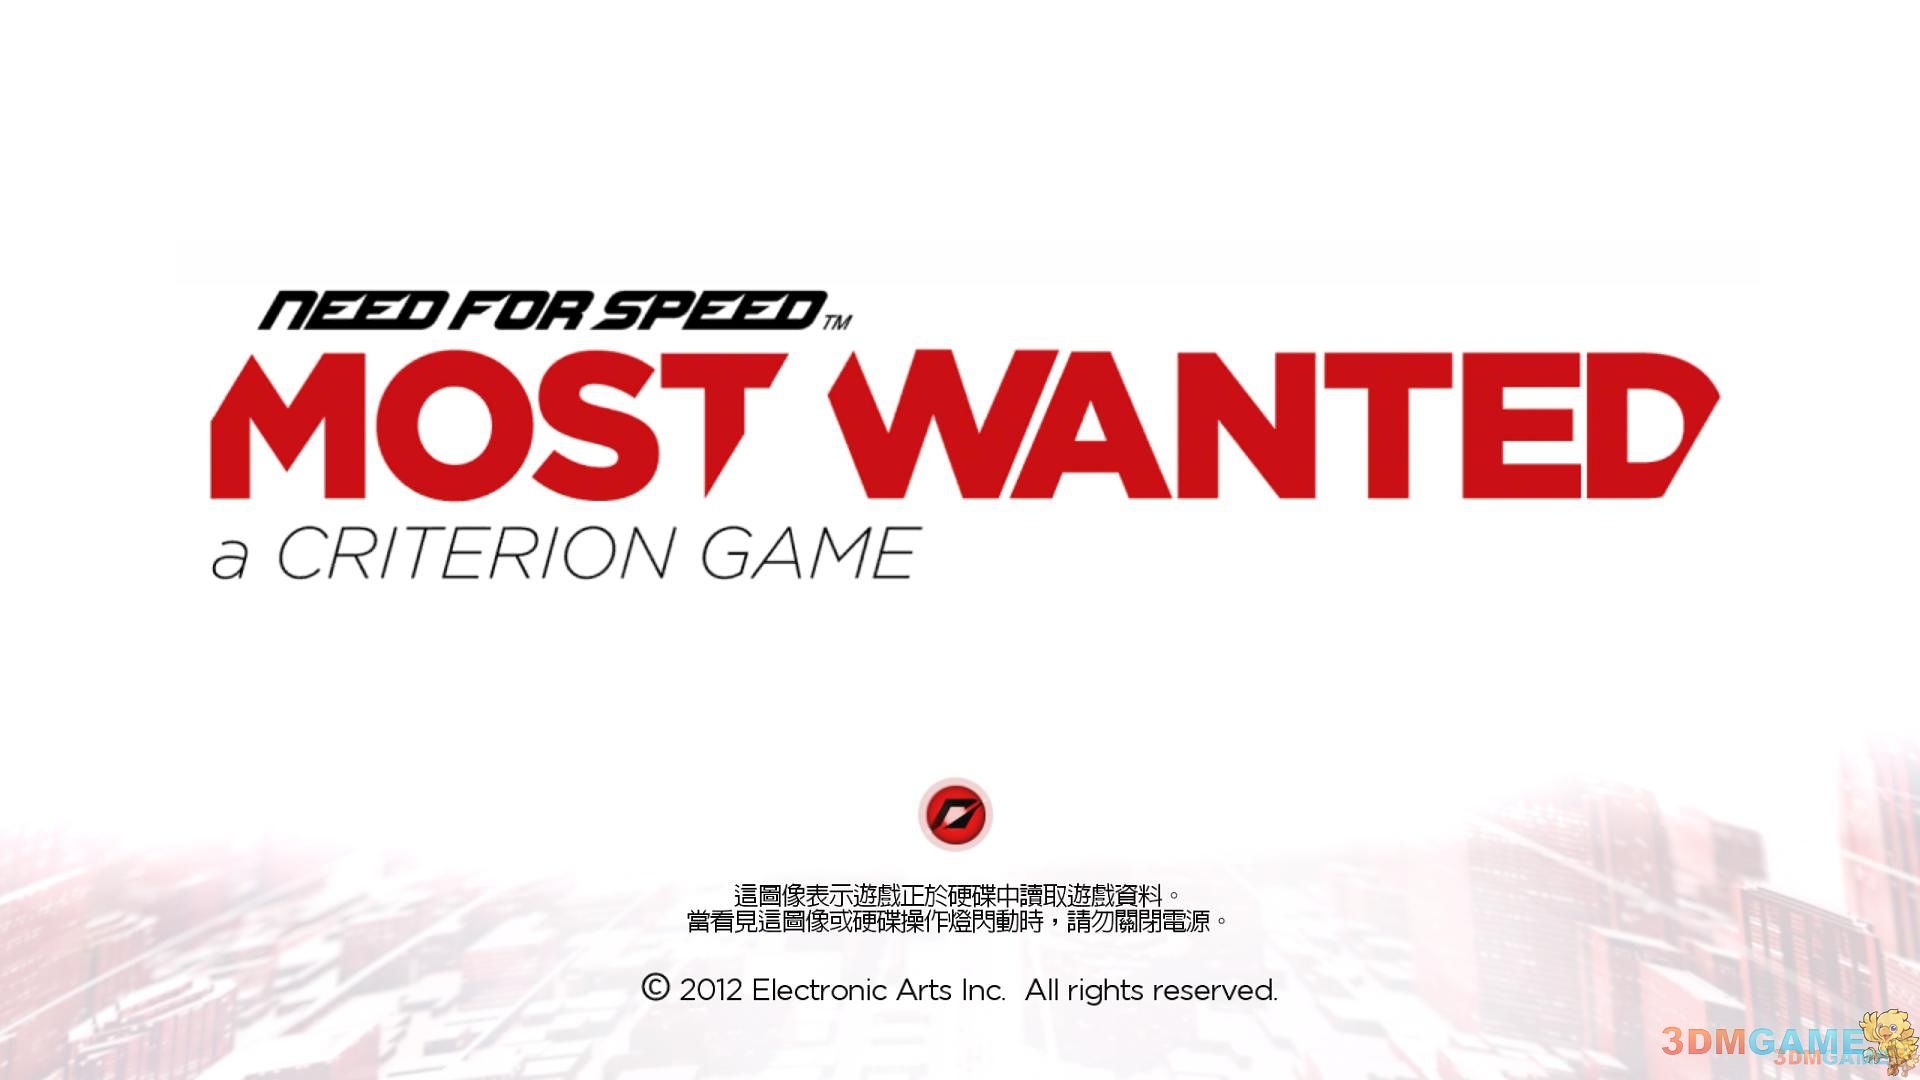 You want these games. Need for Speed most wanted 2012. Need for Speed most wanted 2012 лого. NFS most wanted 2012 обложка. NFS MW 2012 logo.